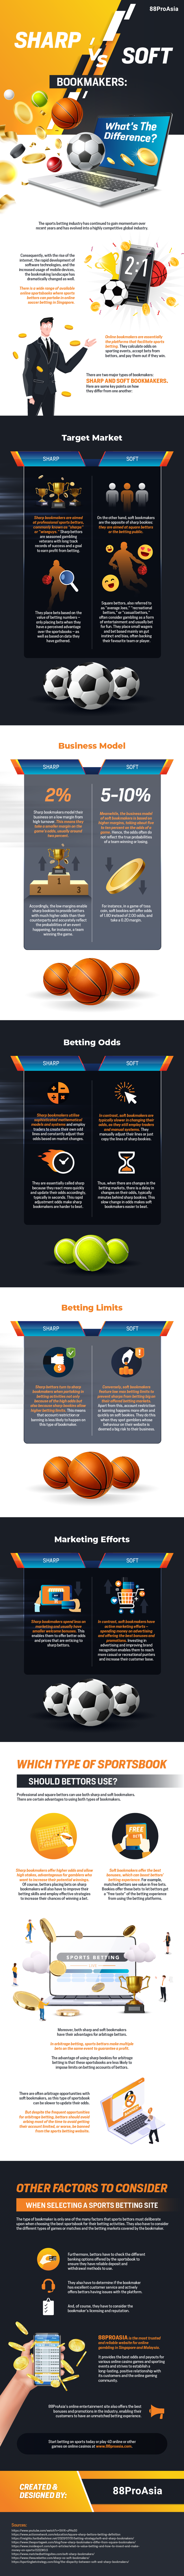 Sharp-vs-Soft-Bookmakers-Whats-The-Difference-Infographic